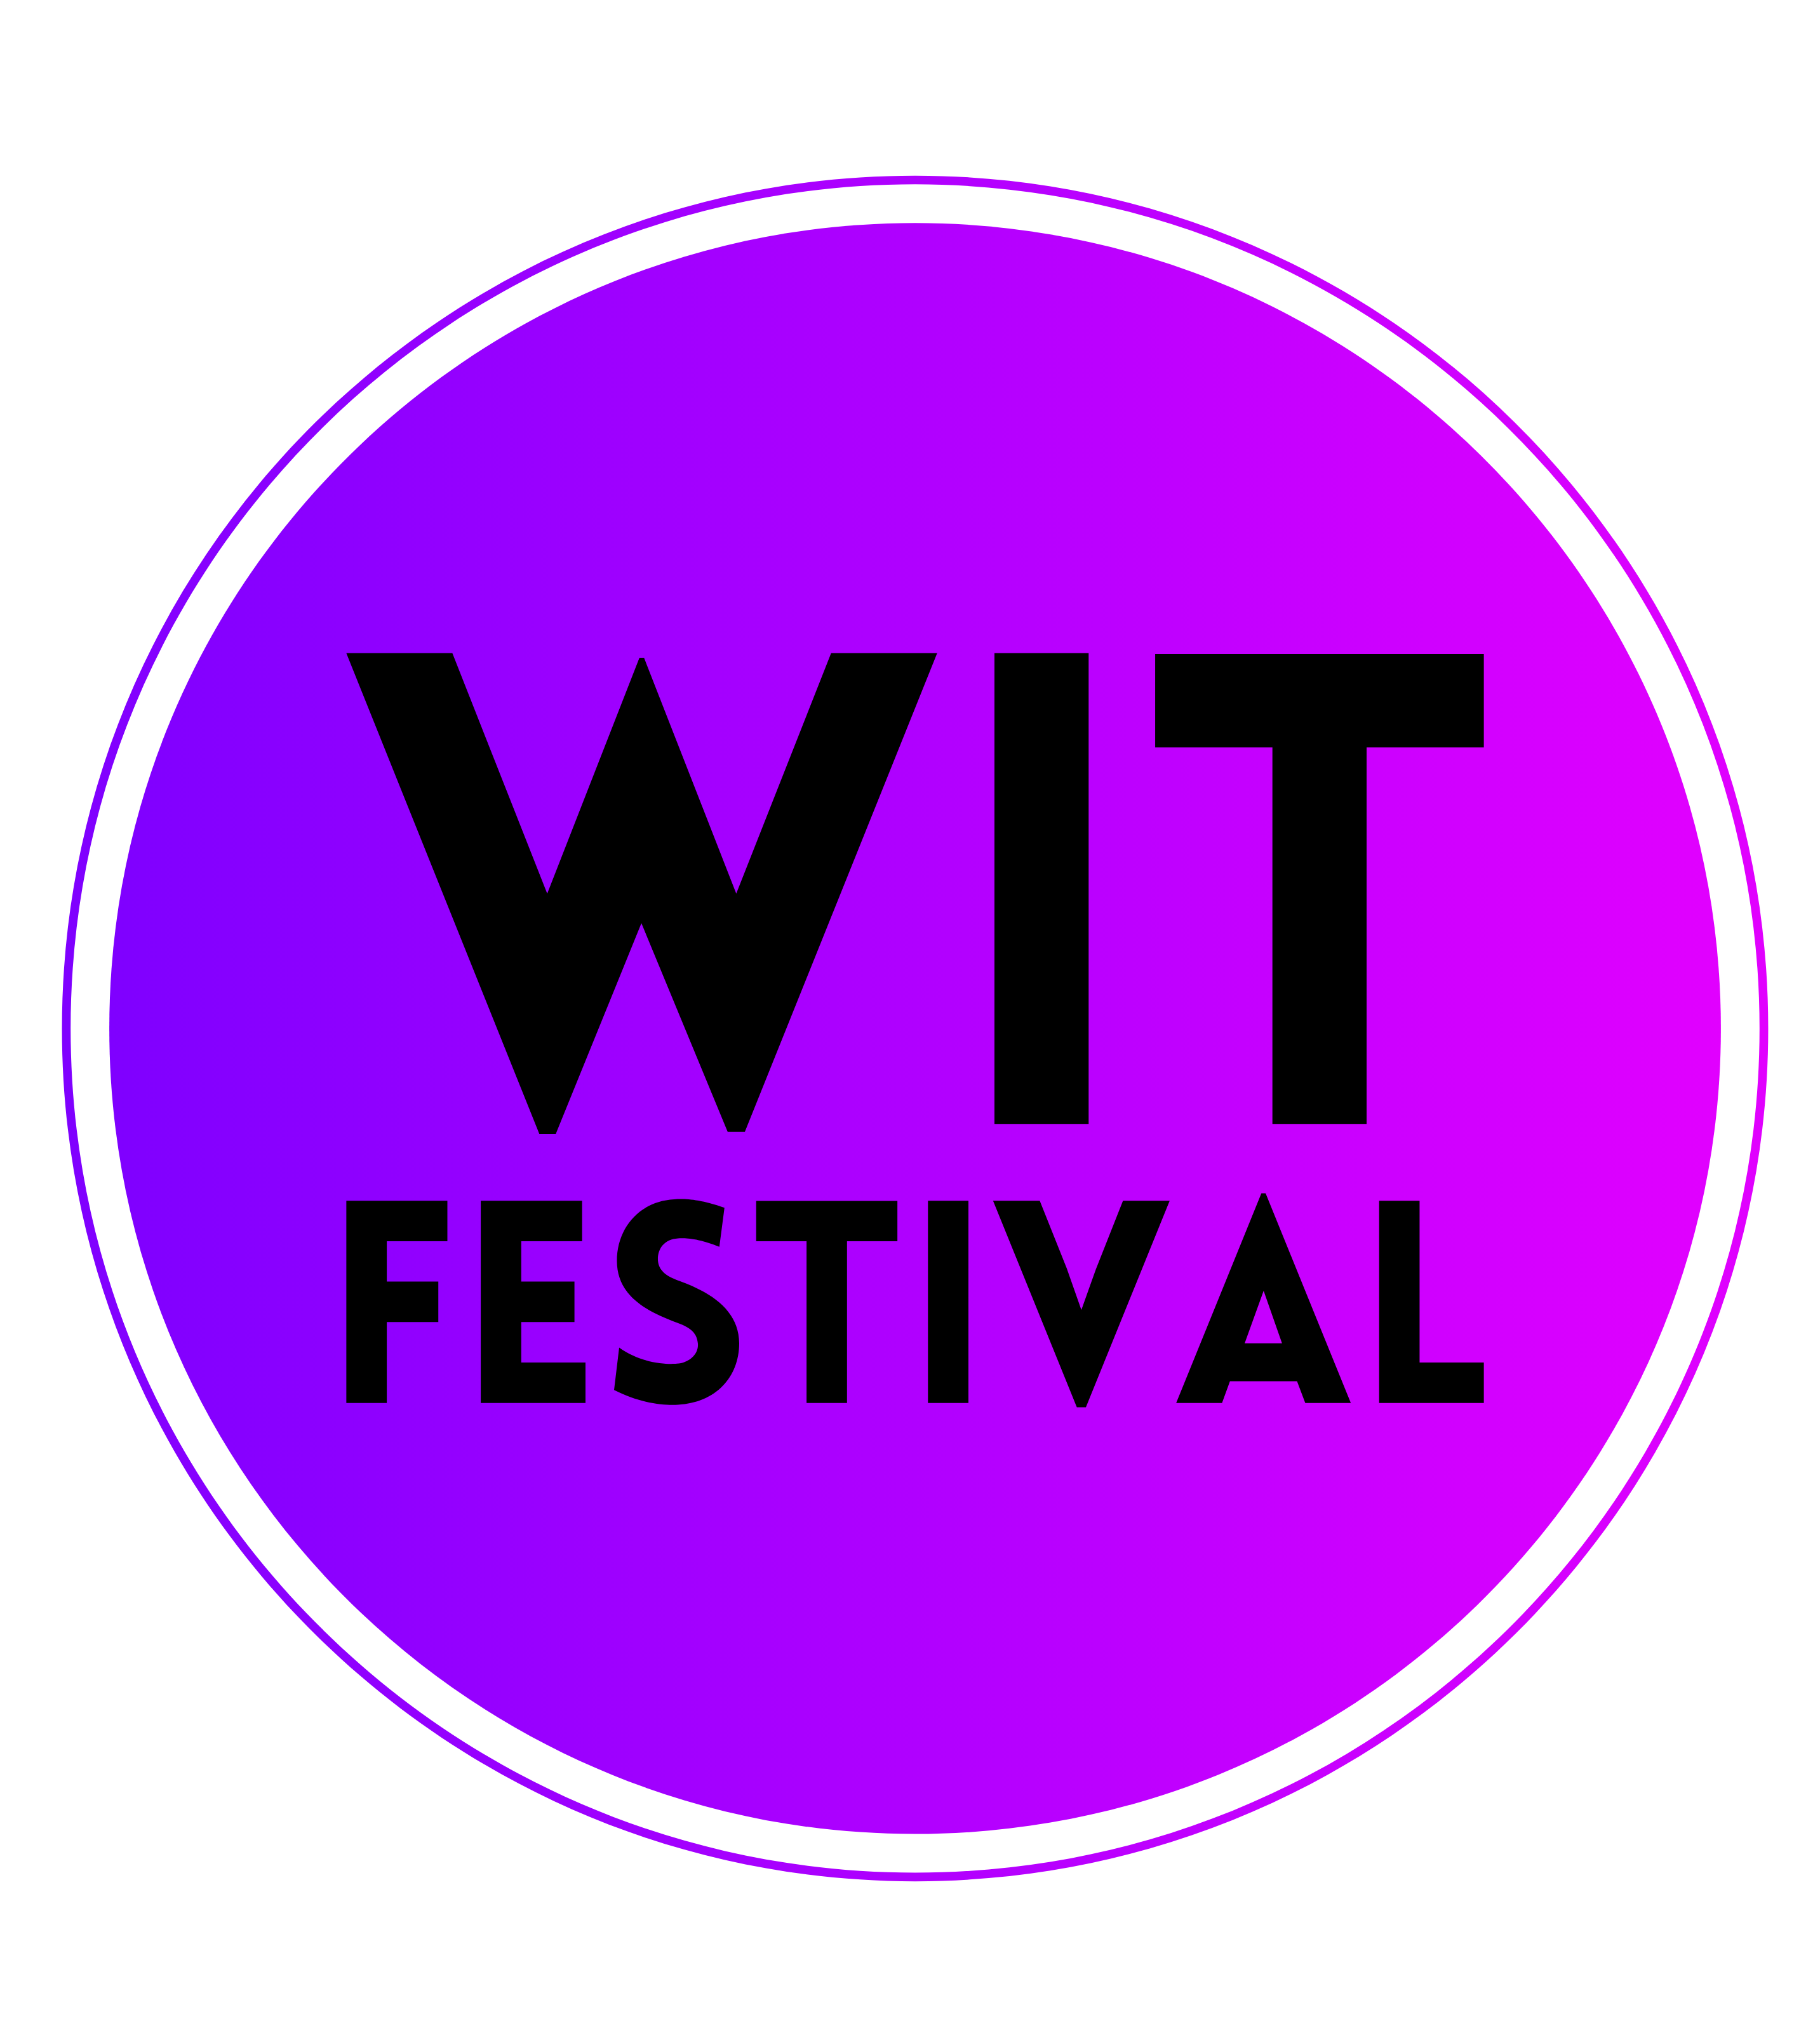 Image for the Women in Theatre Festival. The logo is a bright purple circle with black block lettering stating WIT Festival.